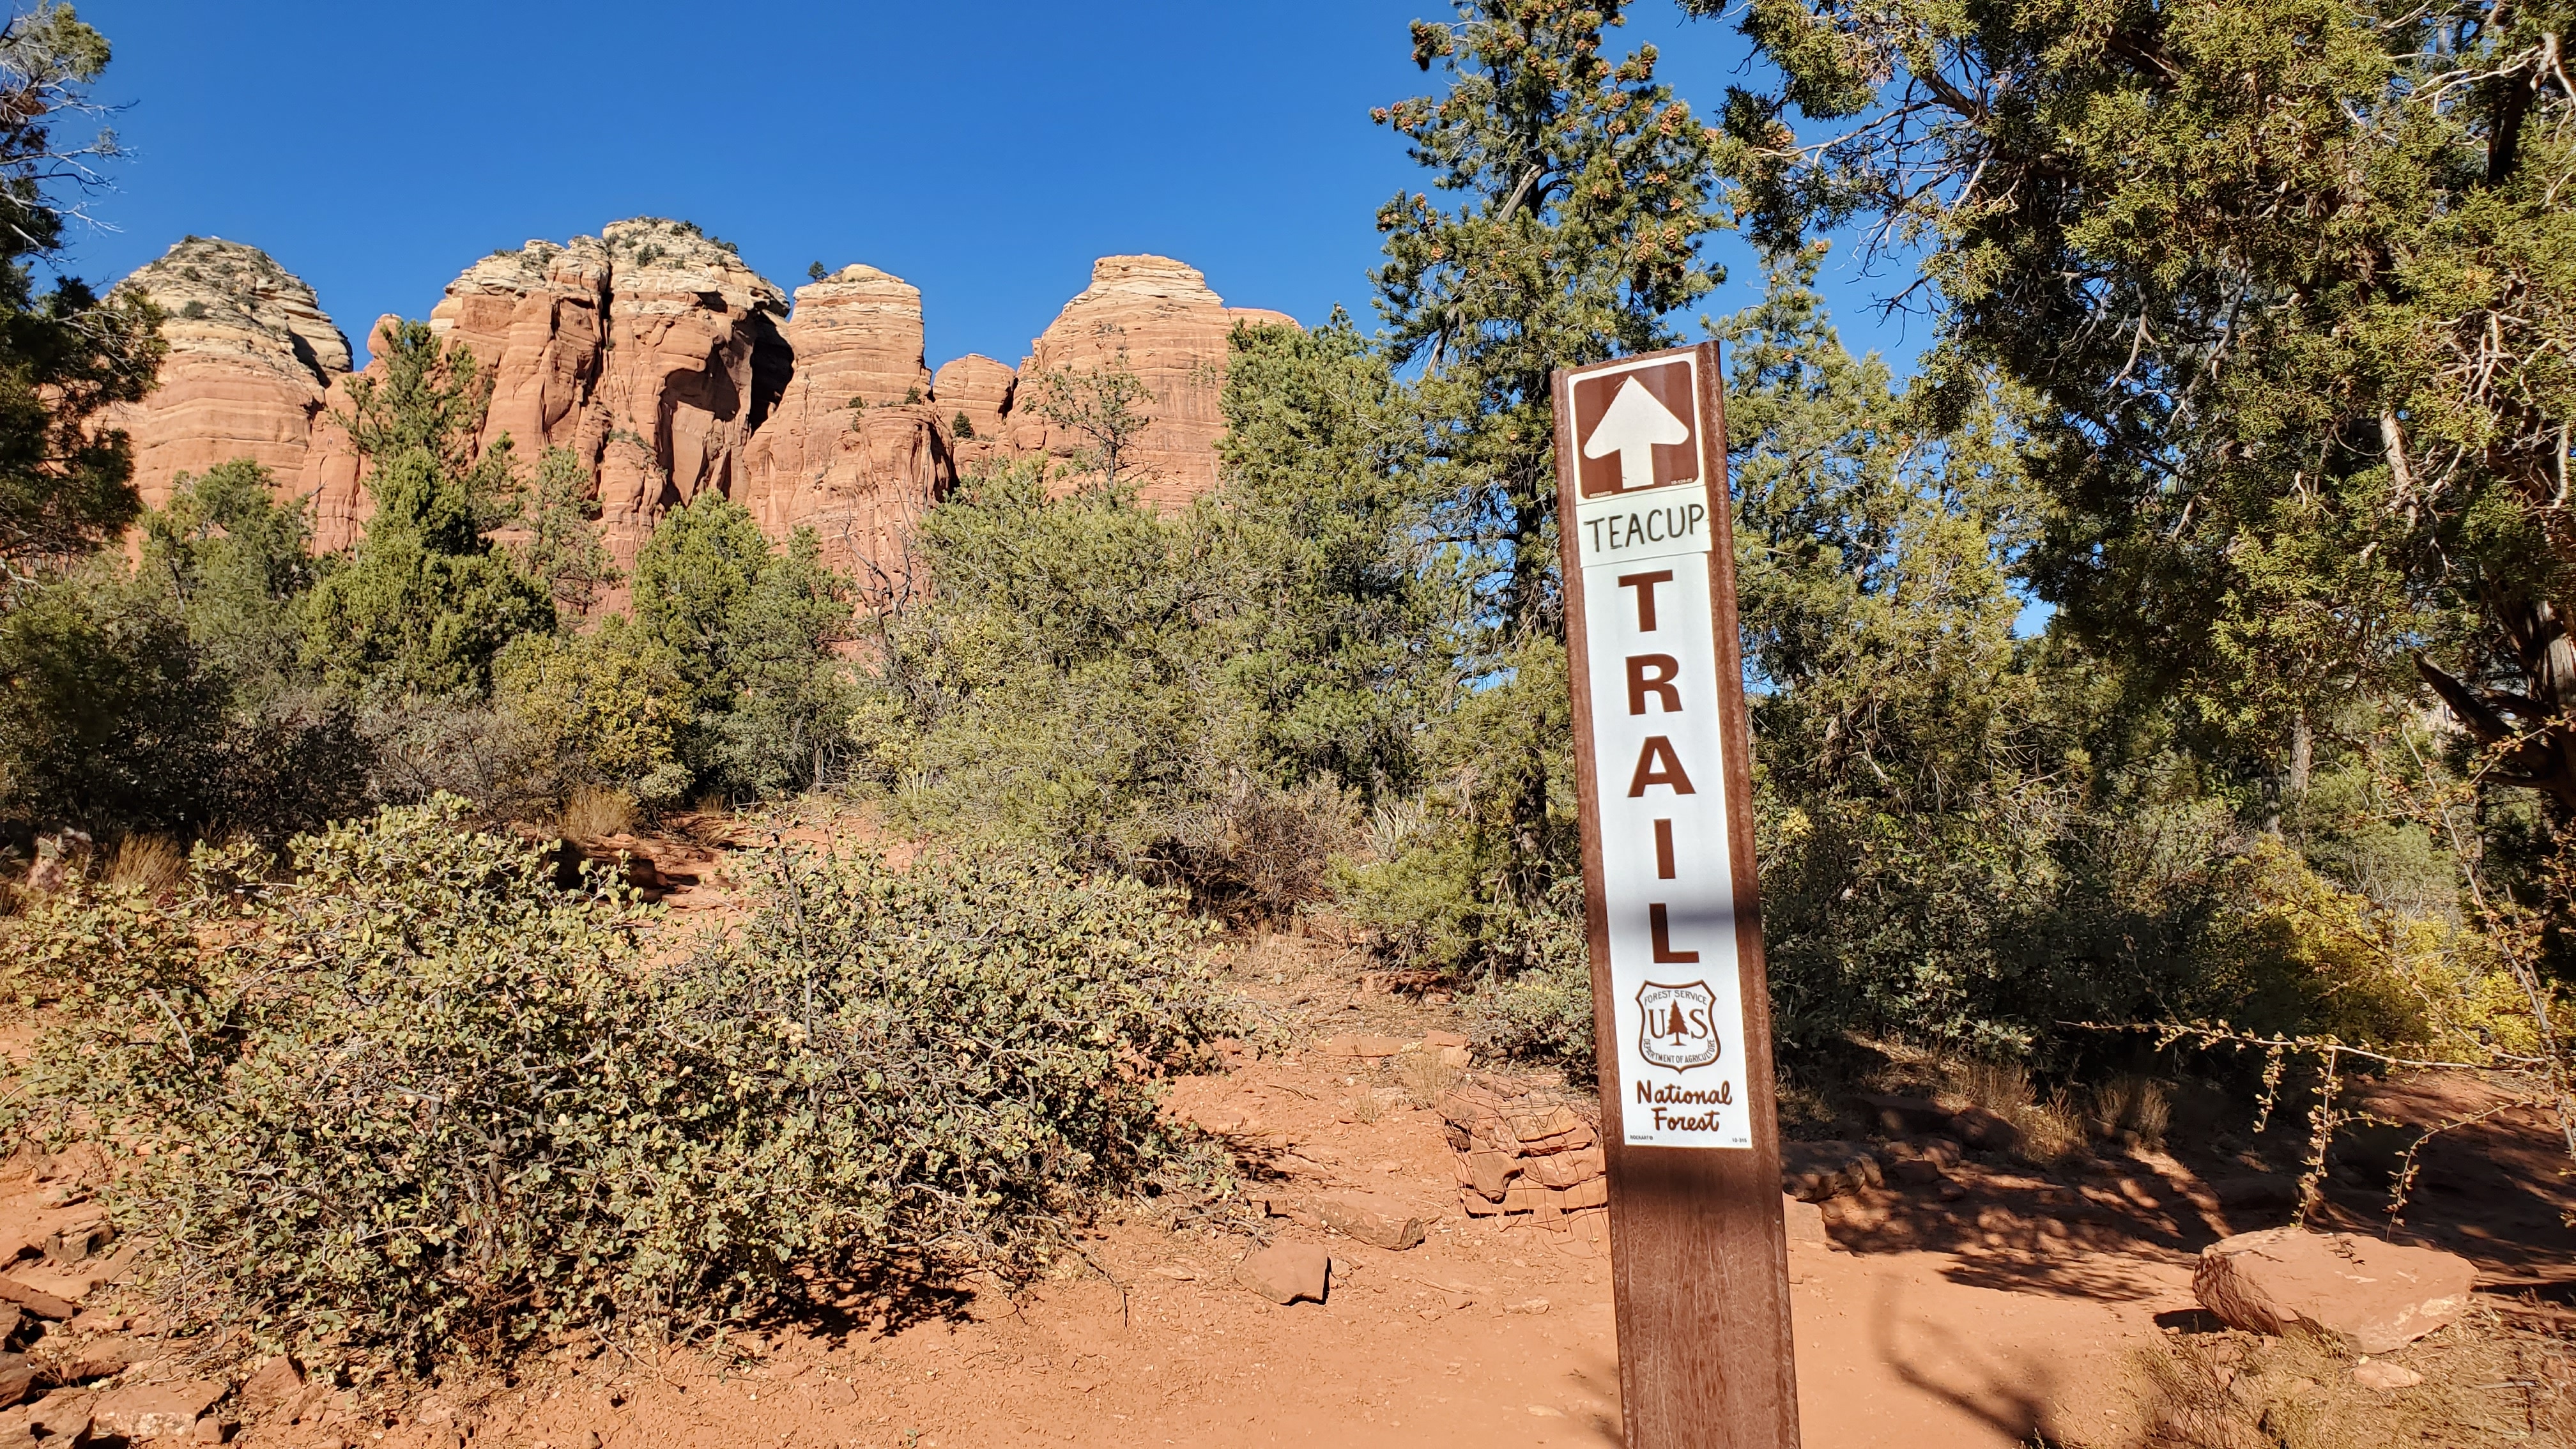 Just 70 Short Steps to the Sugarloaf Trailhead and the TeaCup Trail